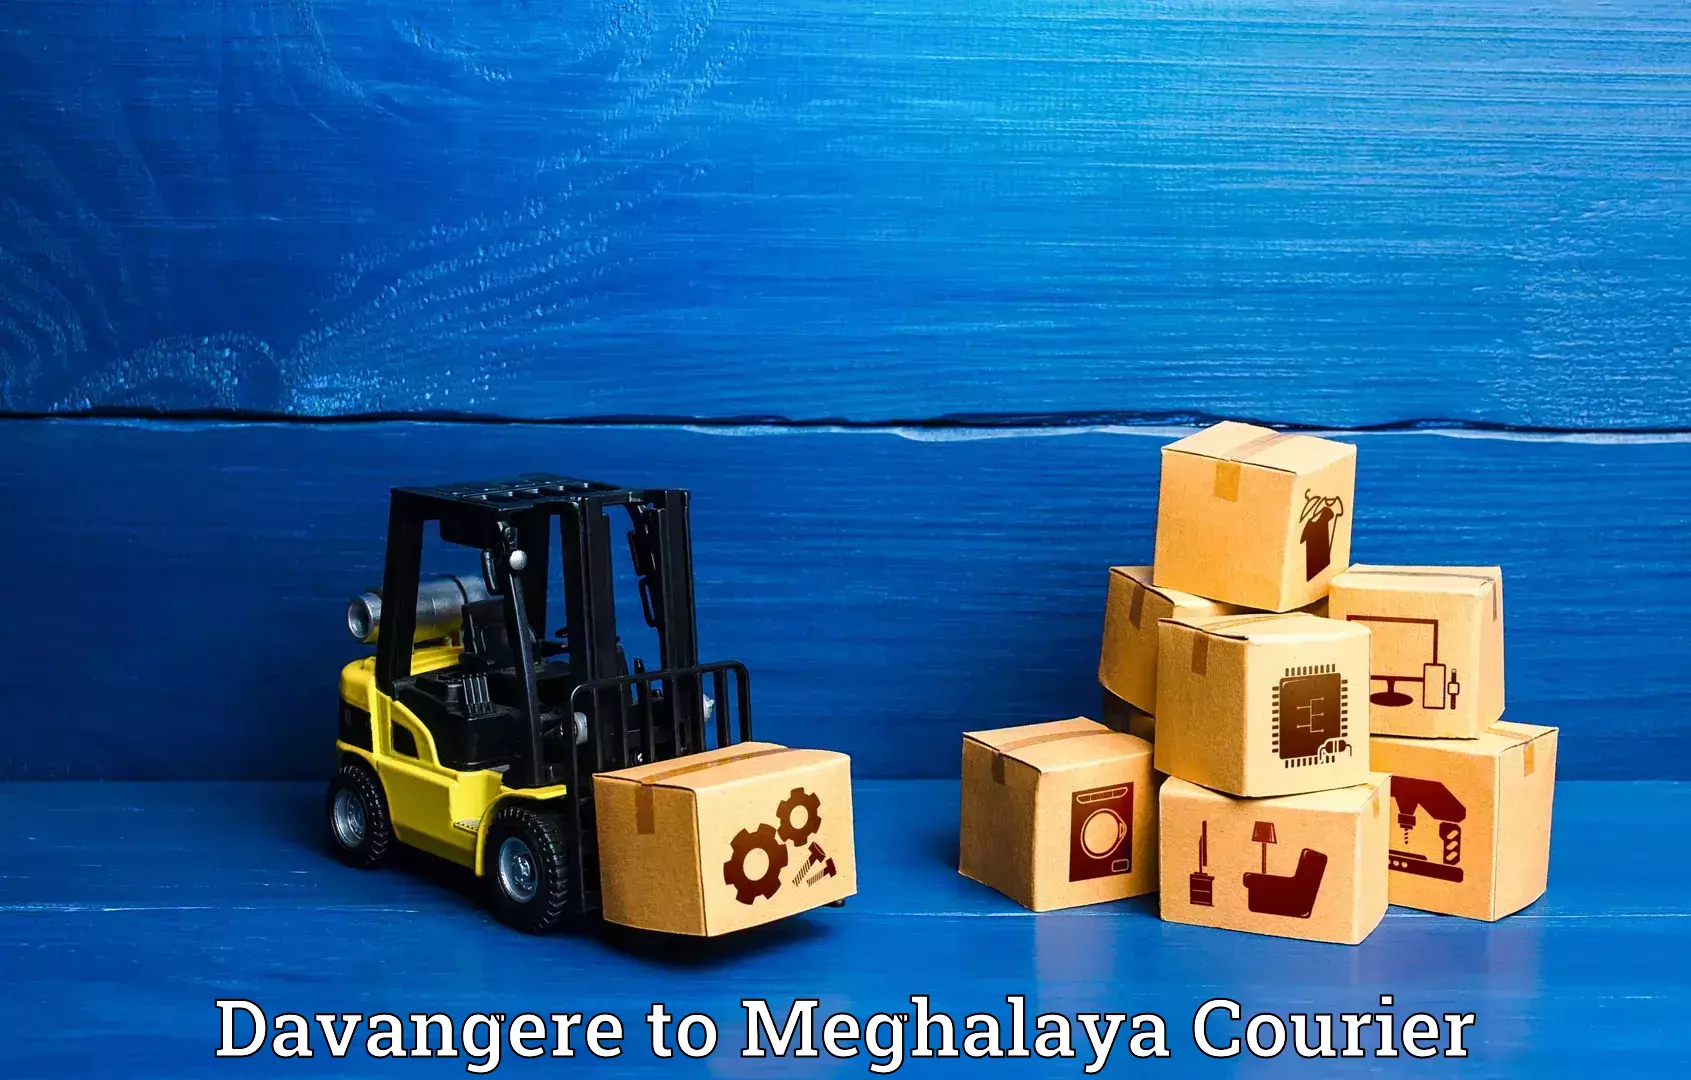 Luggage shipment strategy Davangere to Shillong